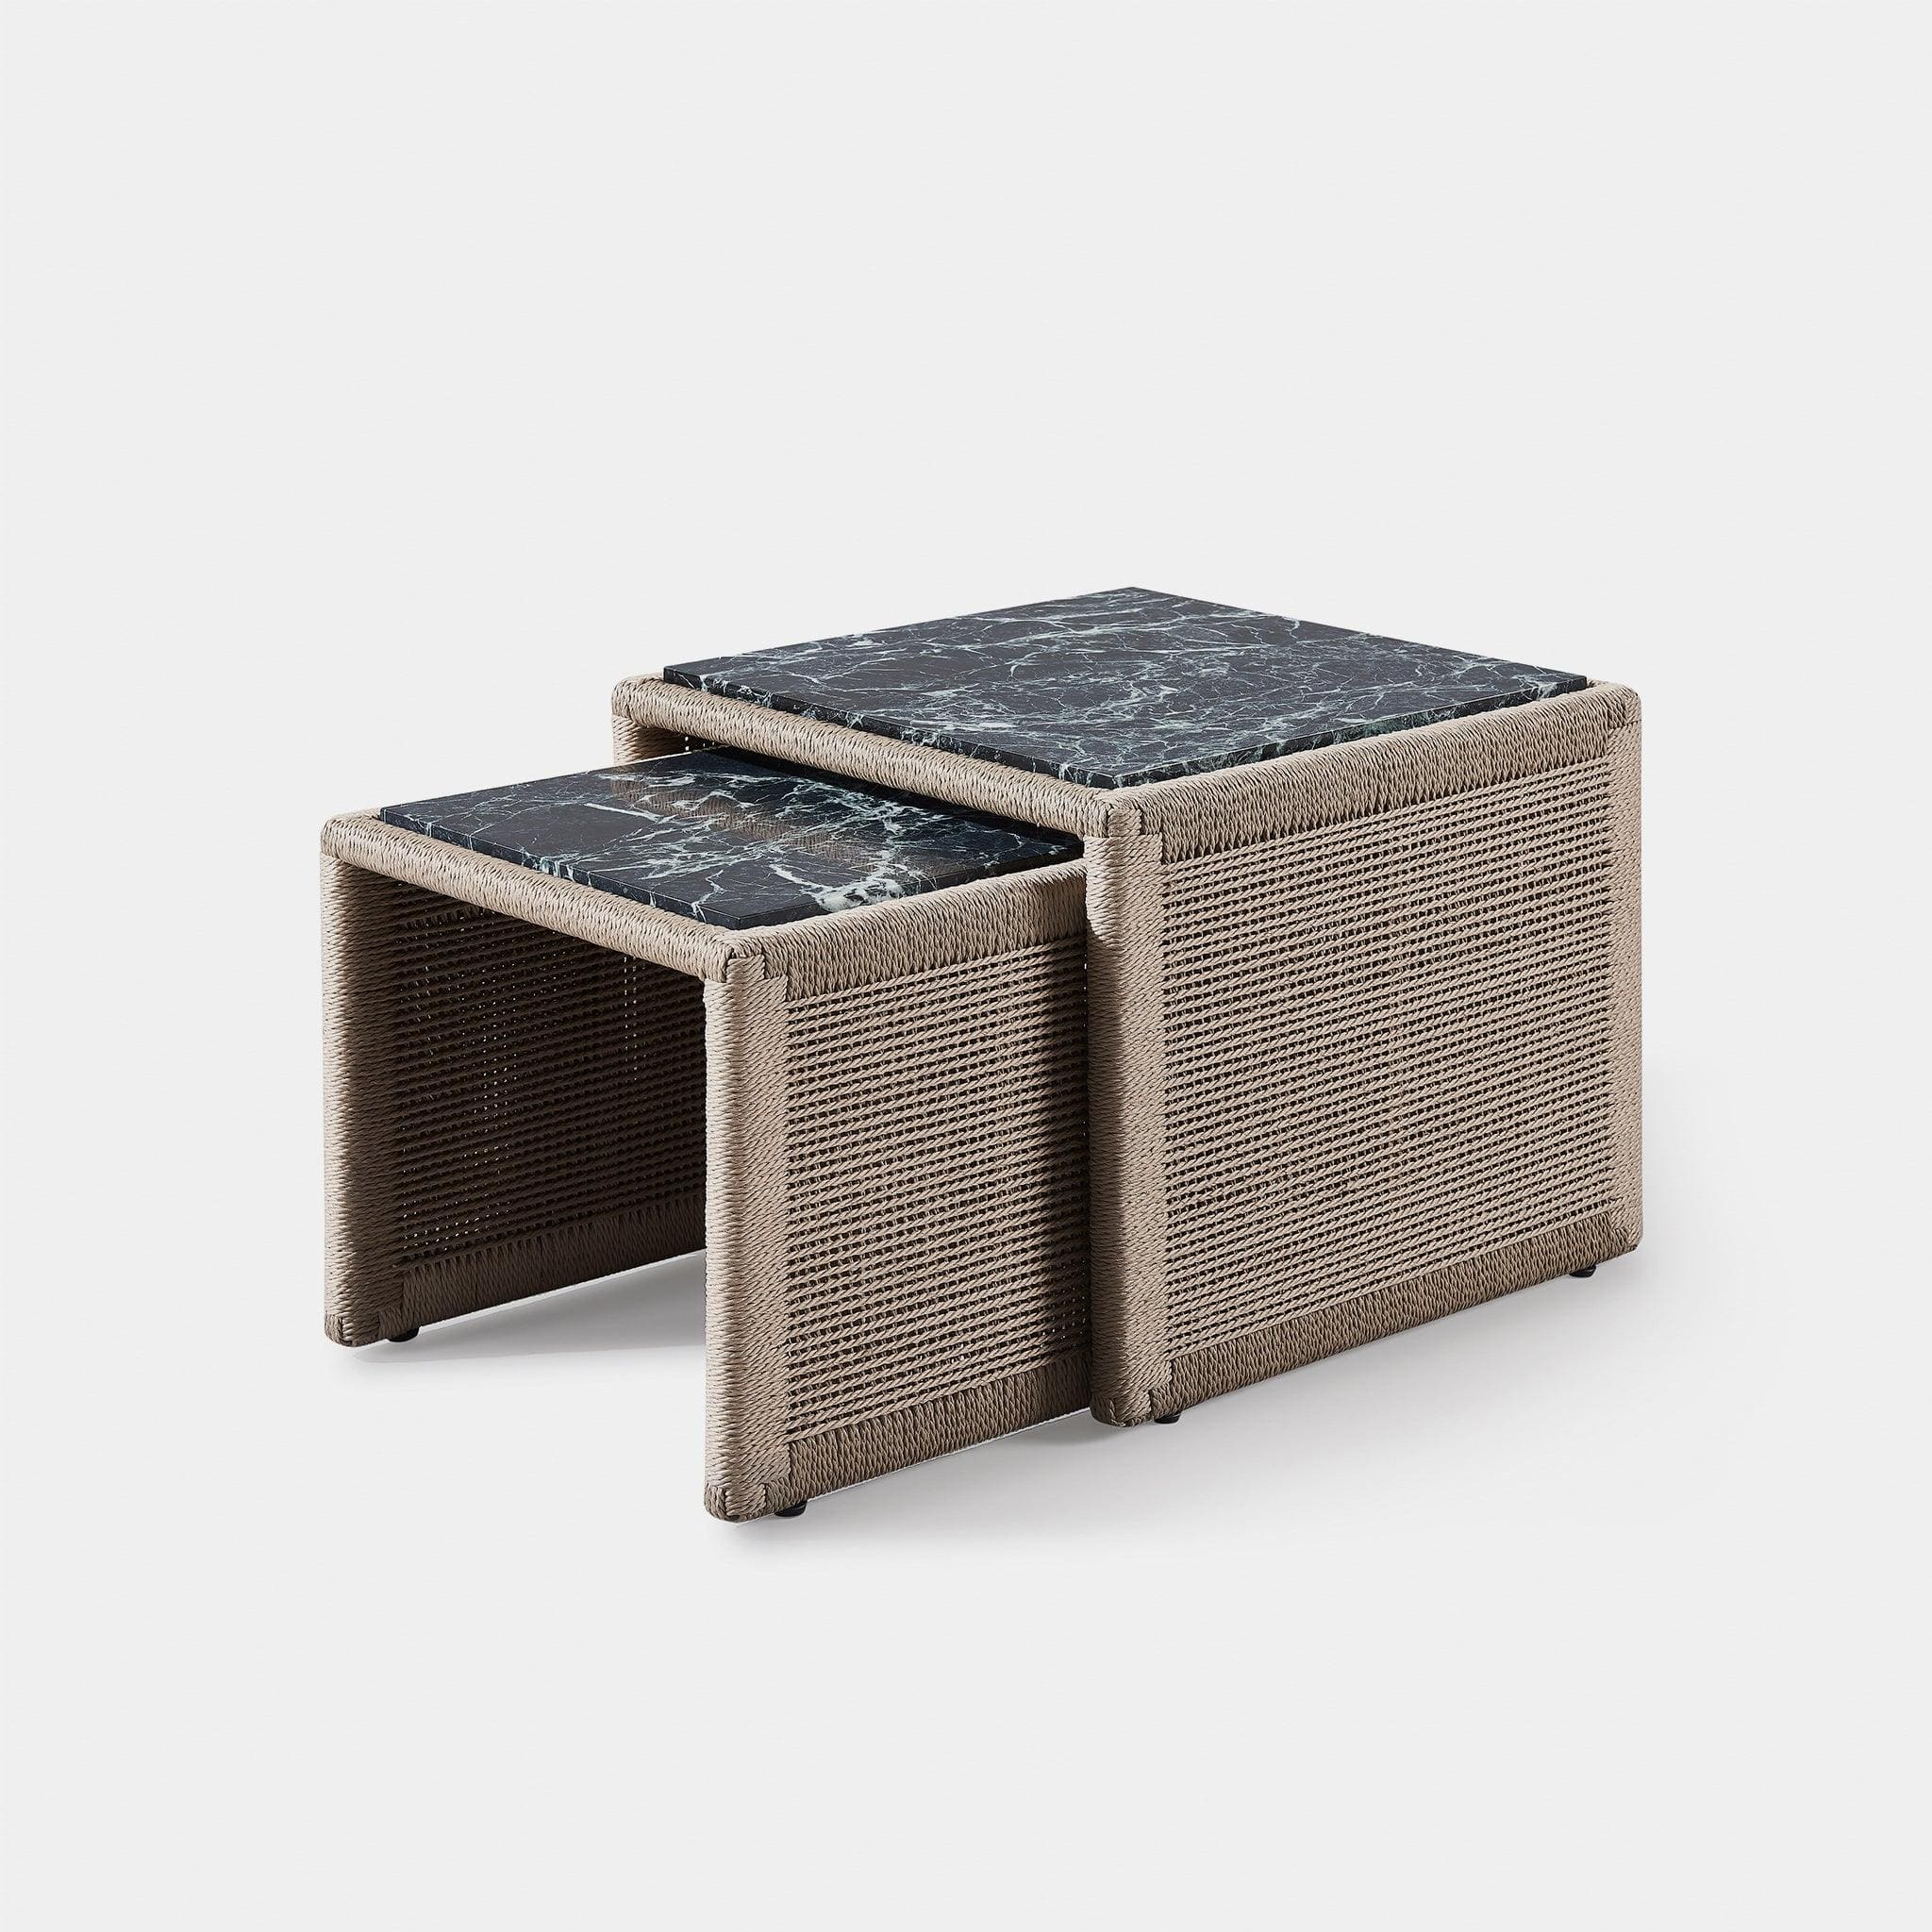 Boxhill's Formentera Nesting Outdoor Side Tables Top View